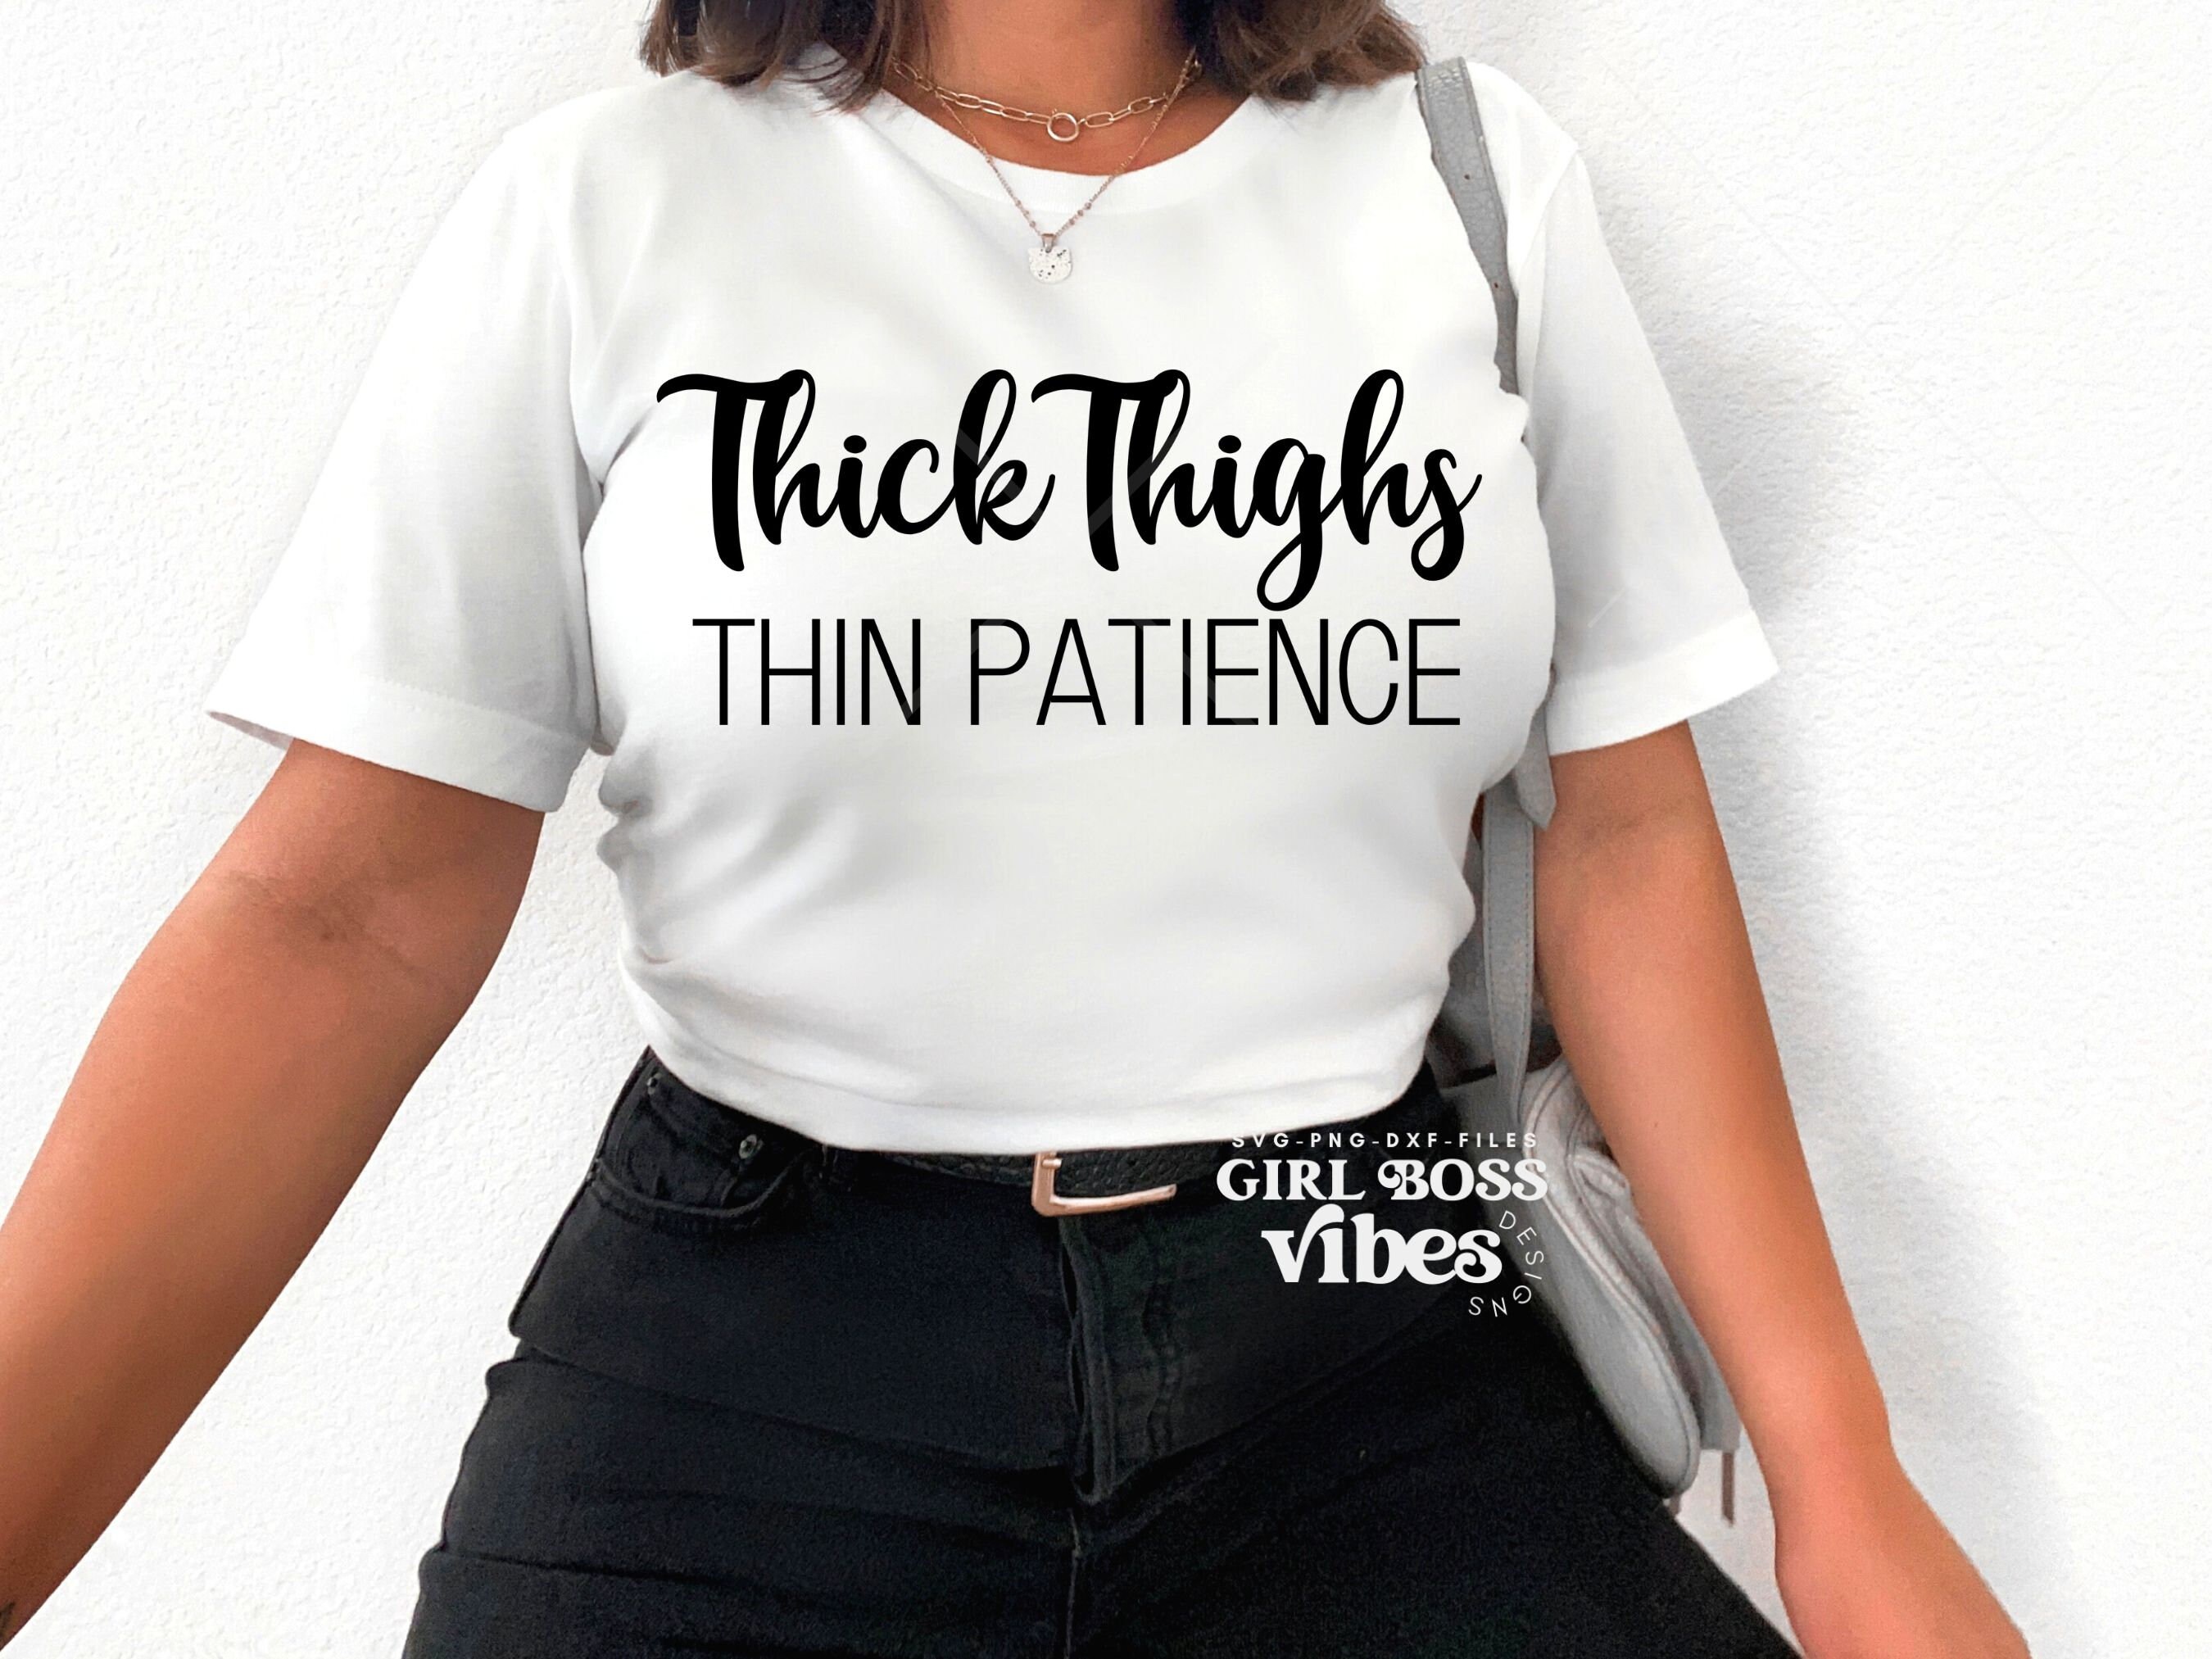 Thick Thighs Thin Patience t-shirt - Feel Great Goods